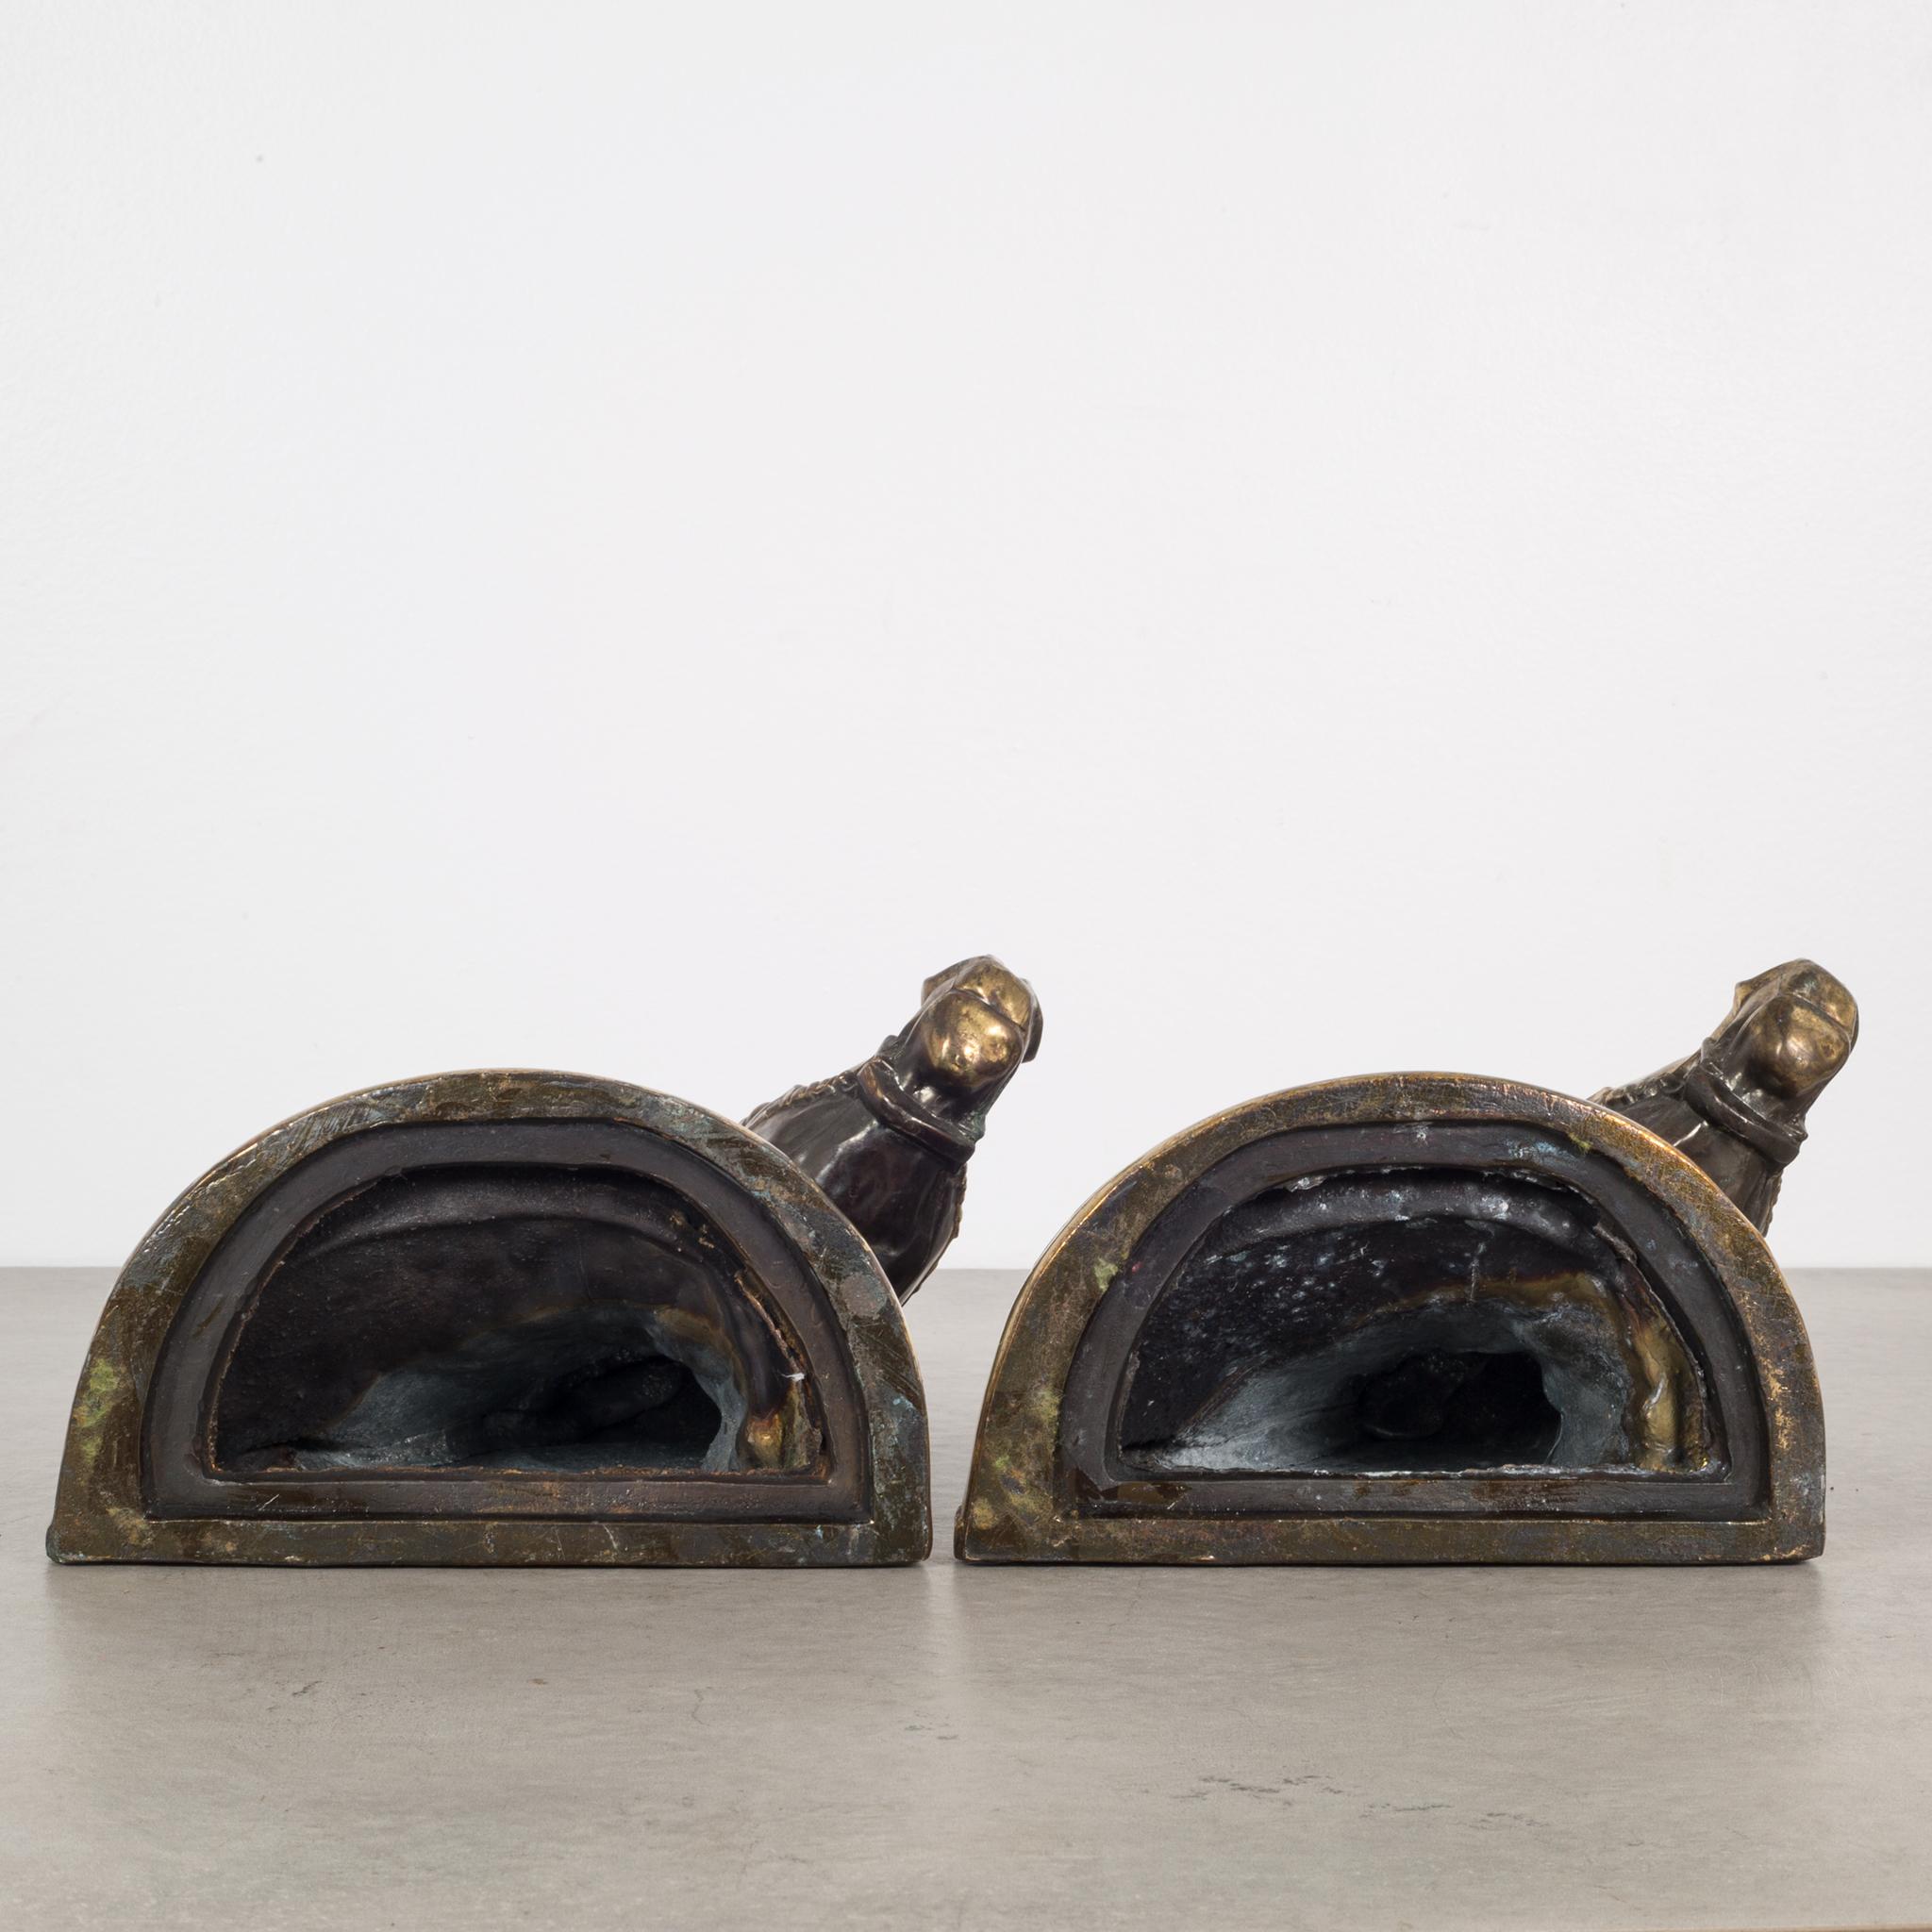 20th Century Bronze-Plated Horse Head Bookends by Glady's Brown and Dodge, circa 1930